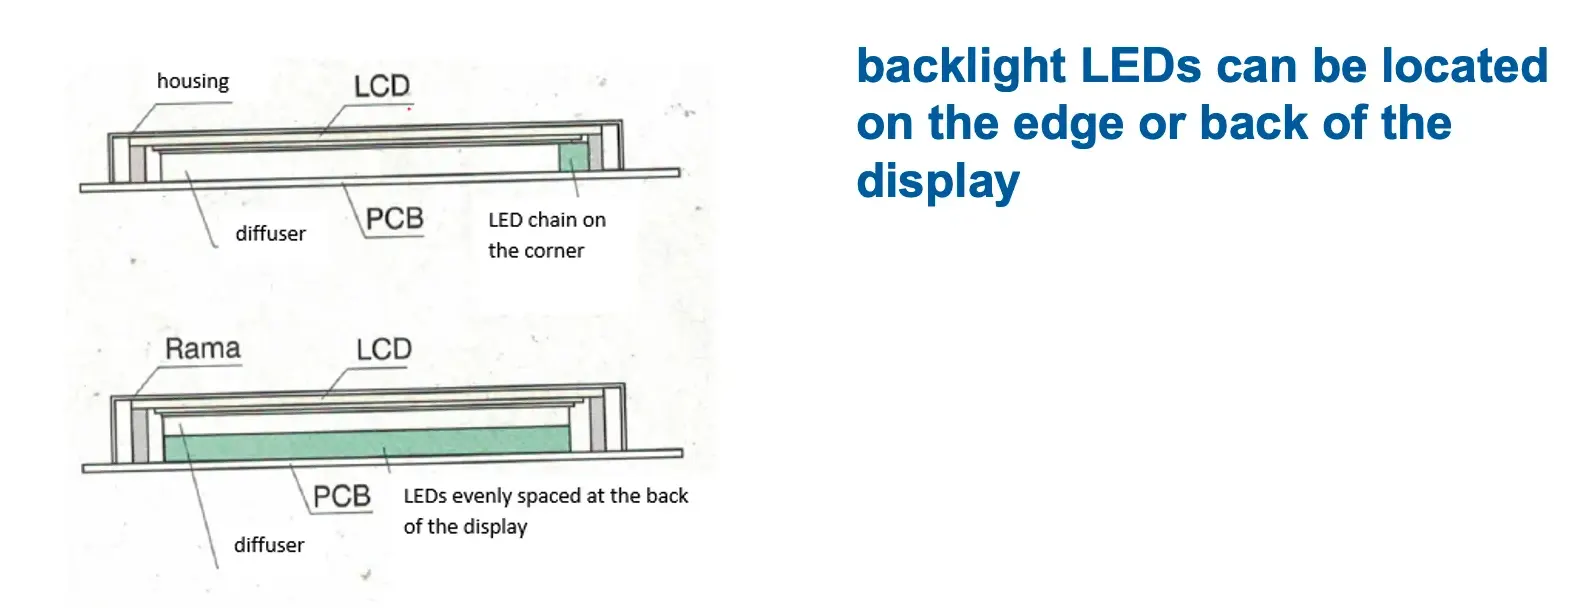 Backlight types of LCD displays